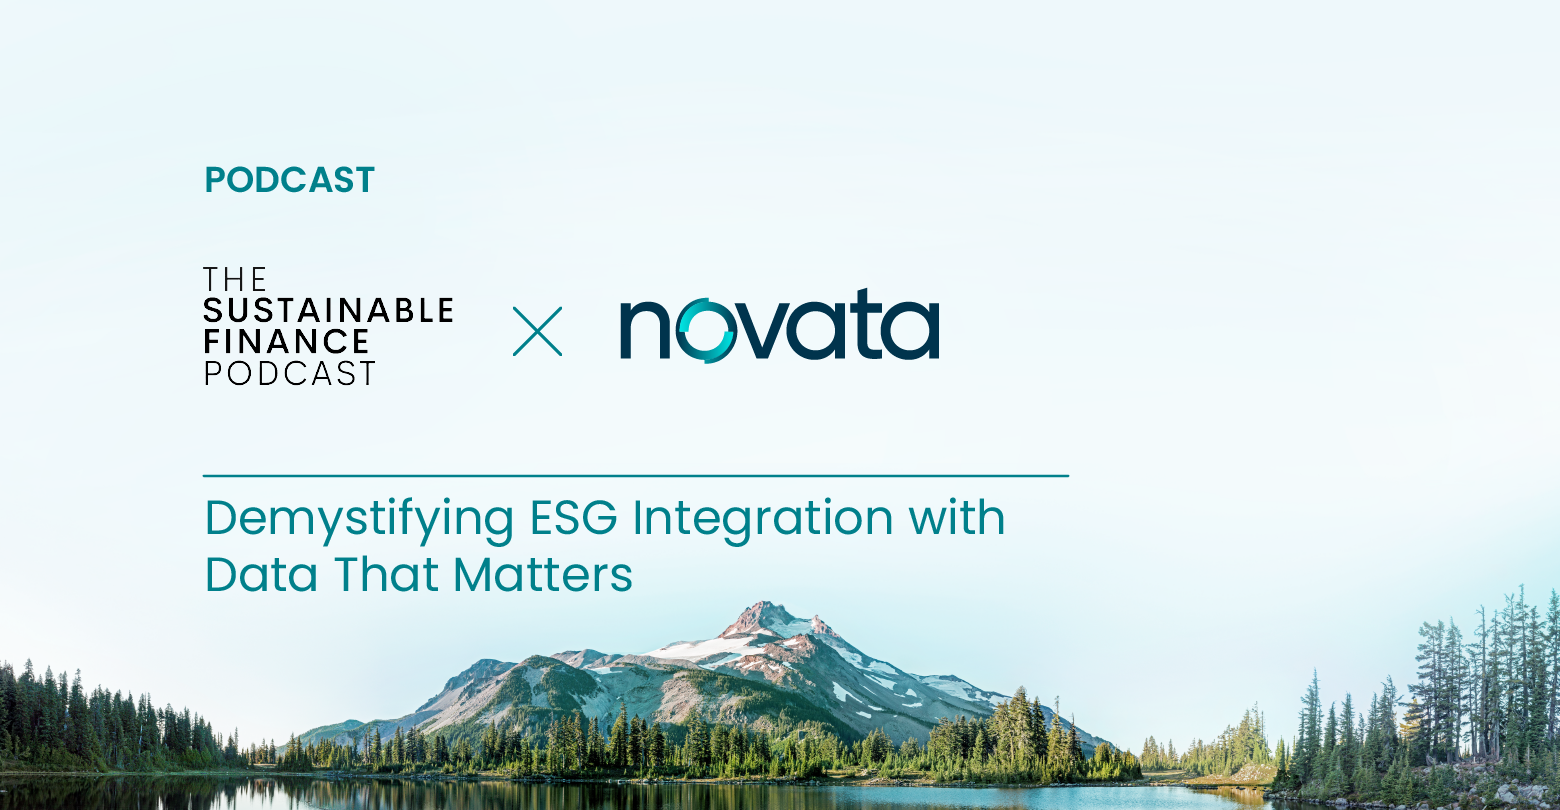 The Sustainable Finance Podcast and Novata: Demystifying ESG Integration with Data that Matters